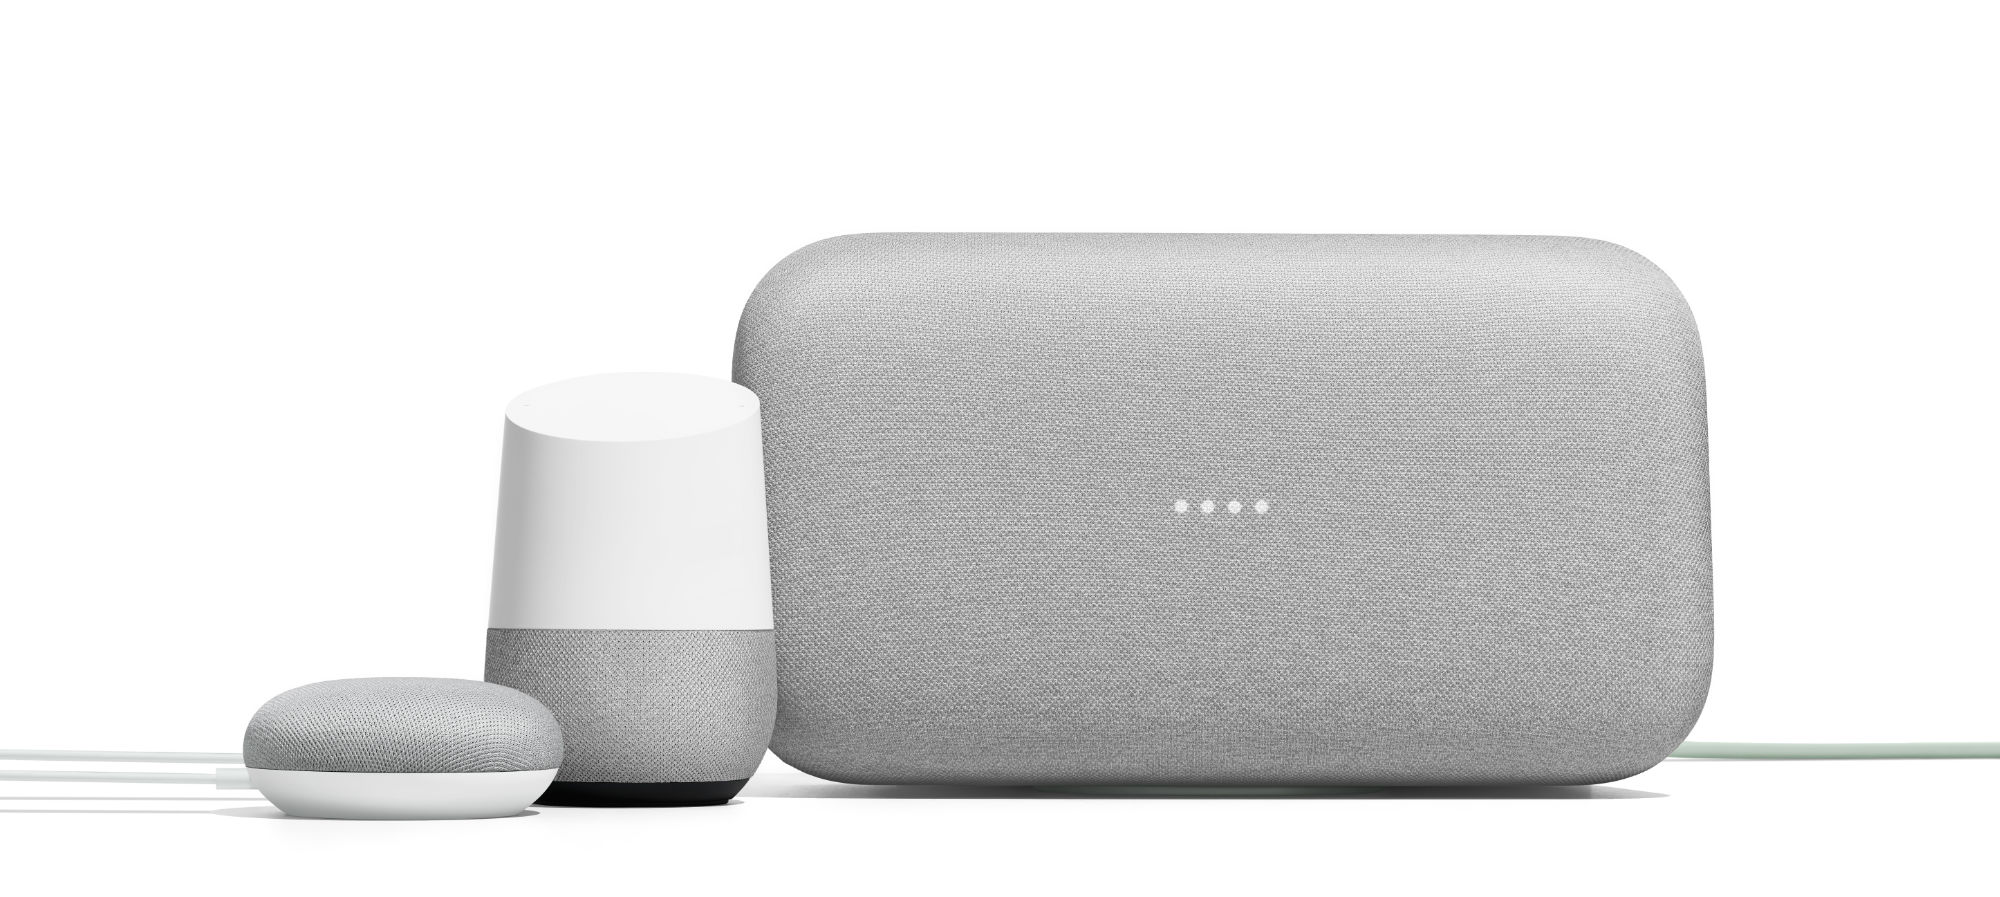 Google home assistant